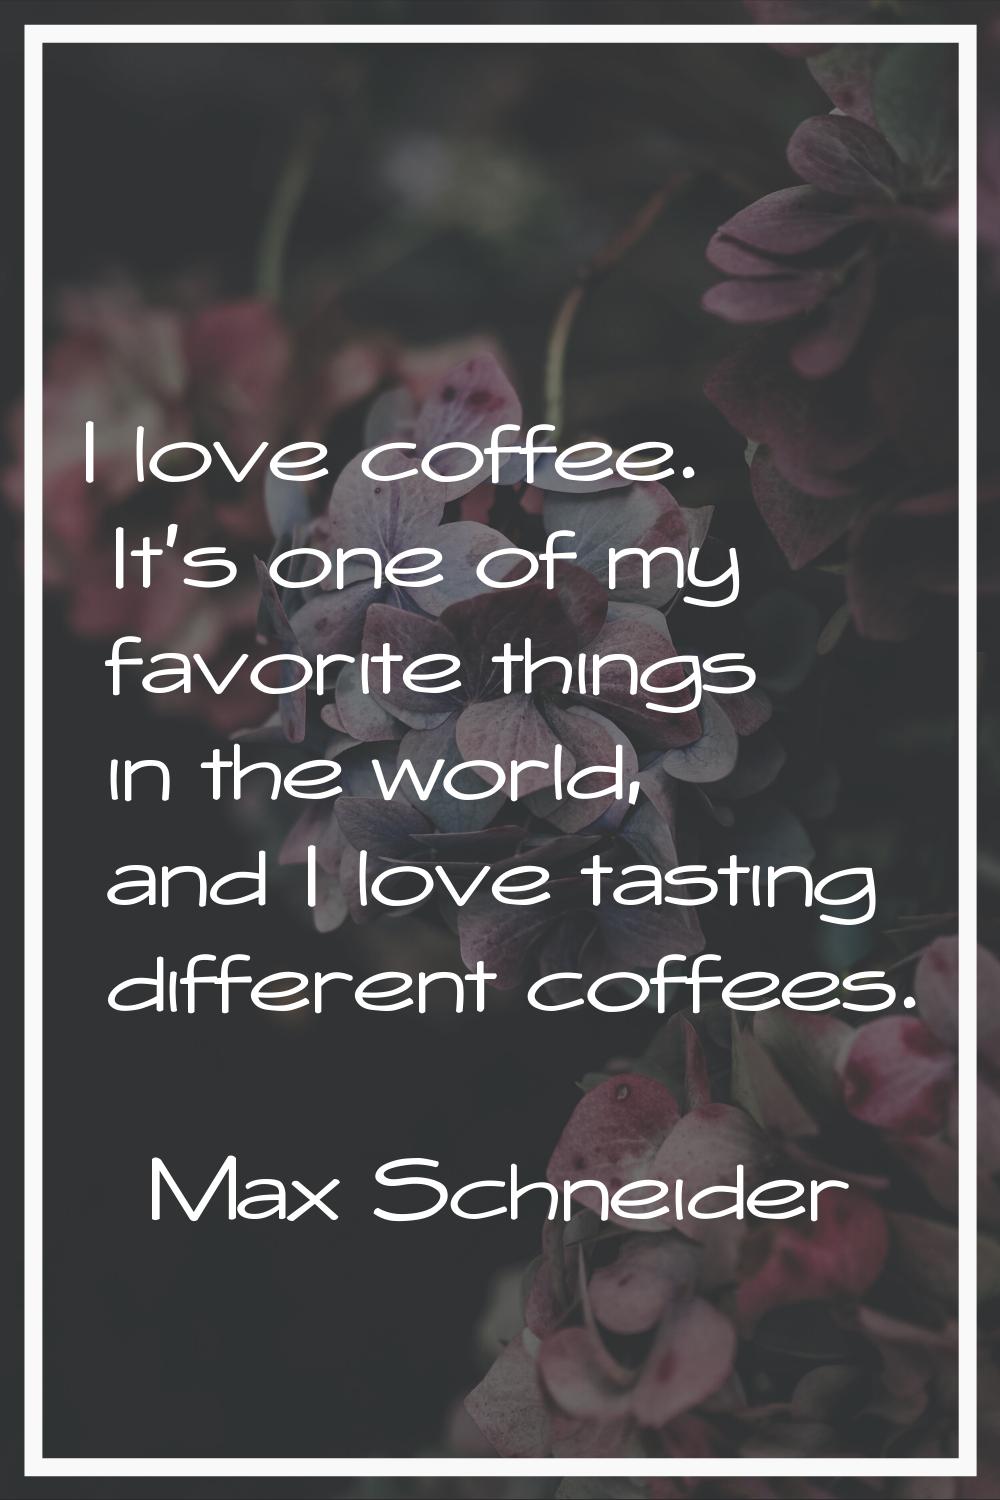 I love coffee. It's one of my favorite things in the world, and I love tasting different coffees.